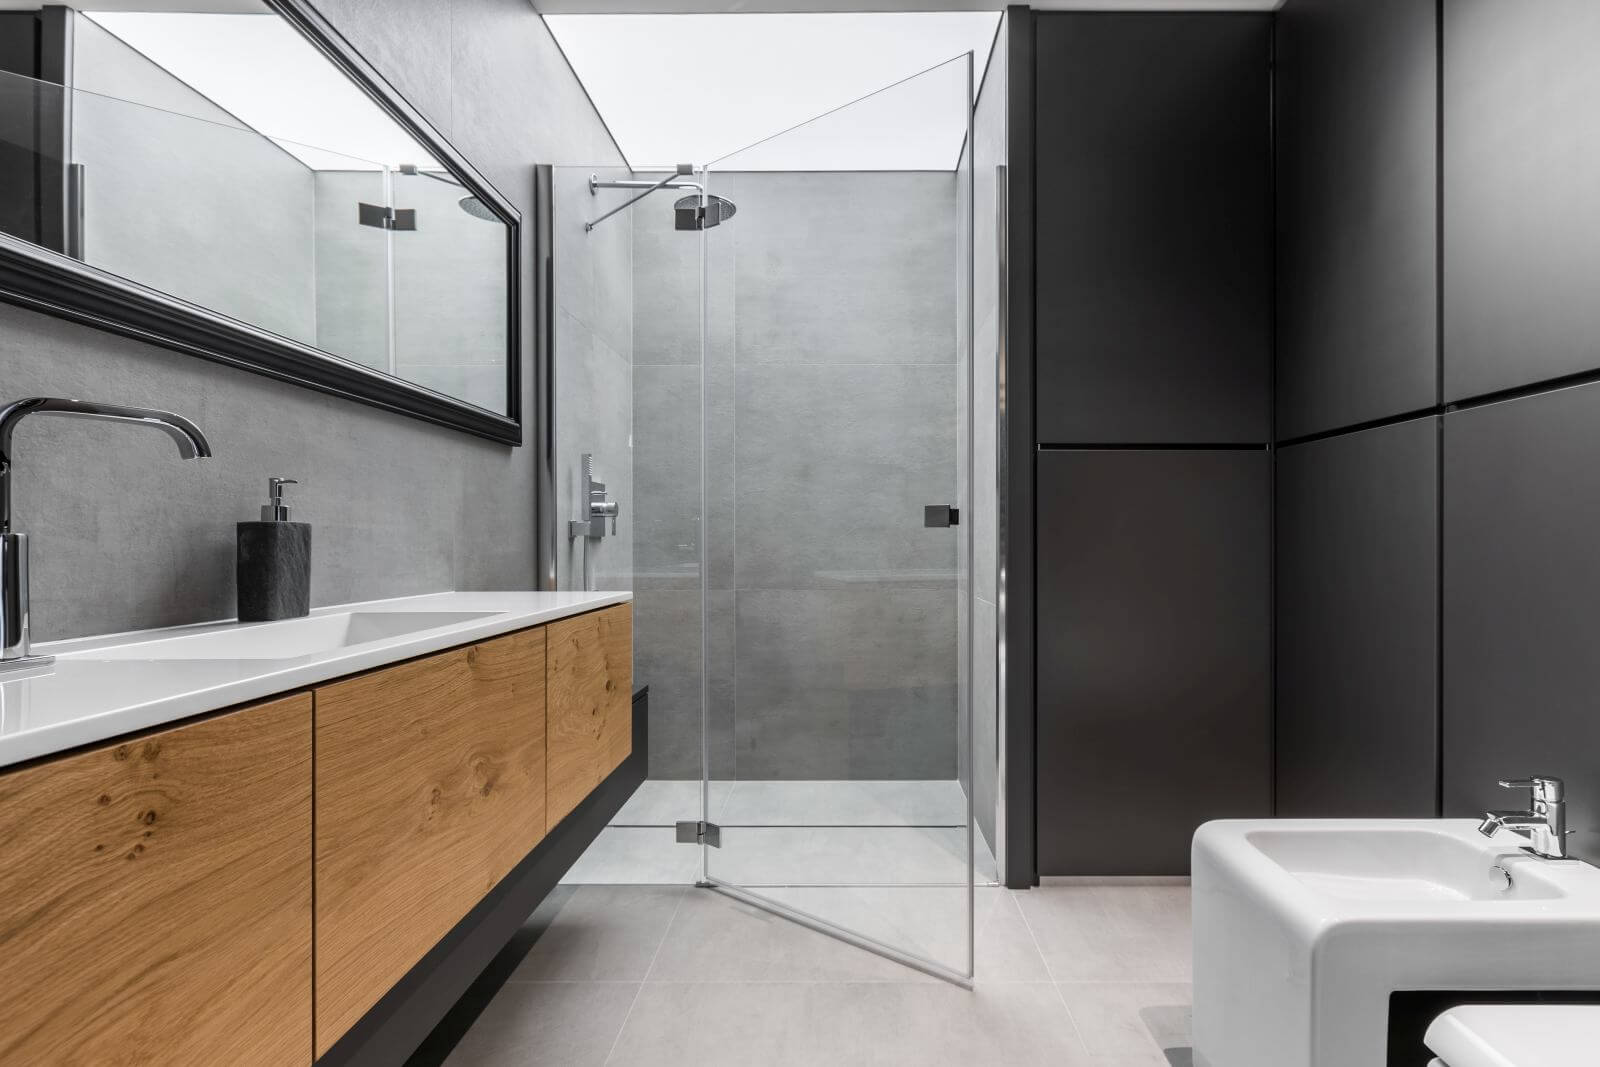 Modern, gray and black bathroom with shower, bidet, sink and wooden cabinet